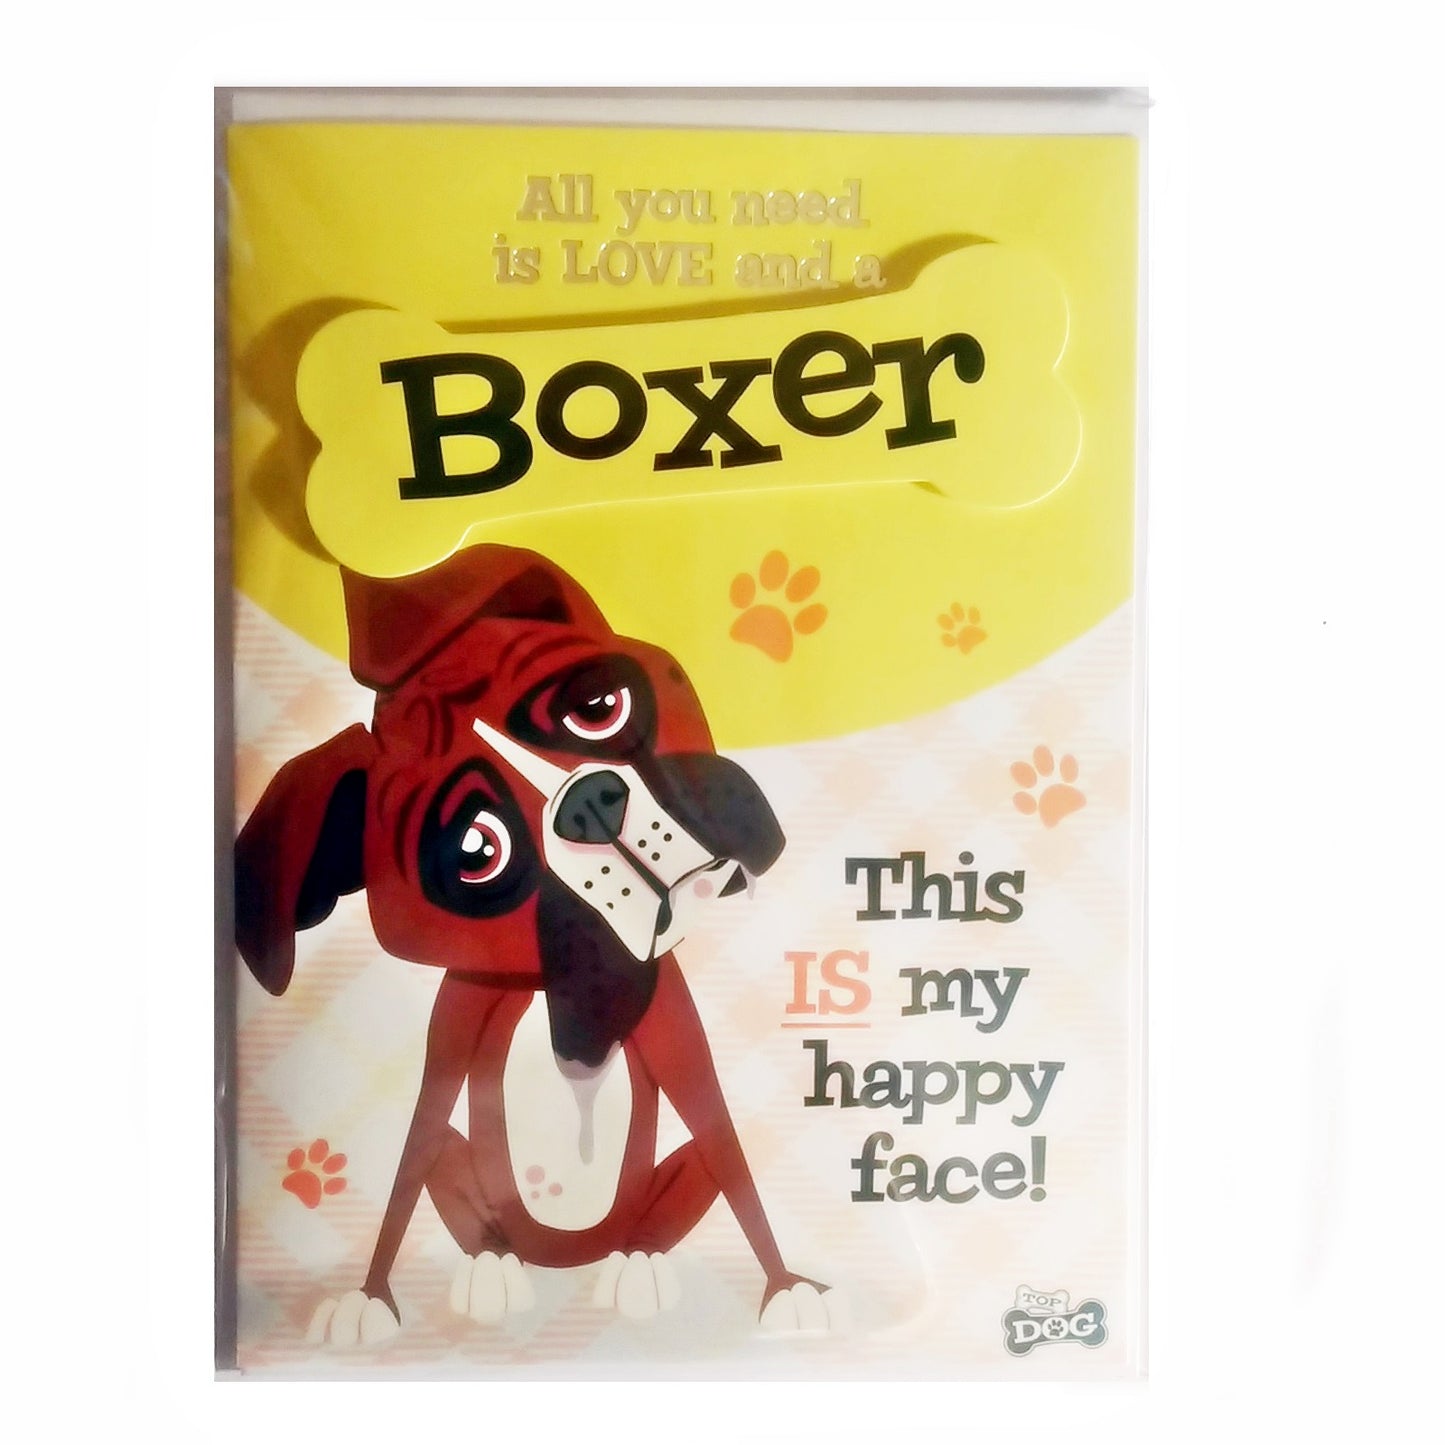 Wags & Whiskers Dog Greeting Card "Boxer" by Paper Island